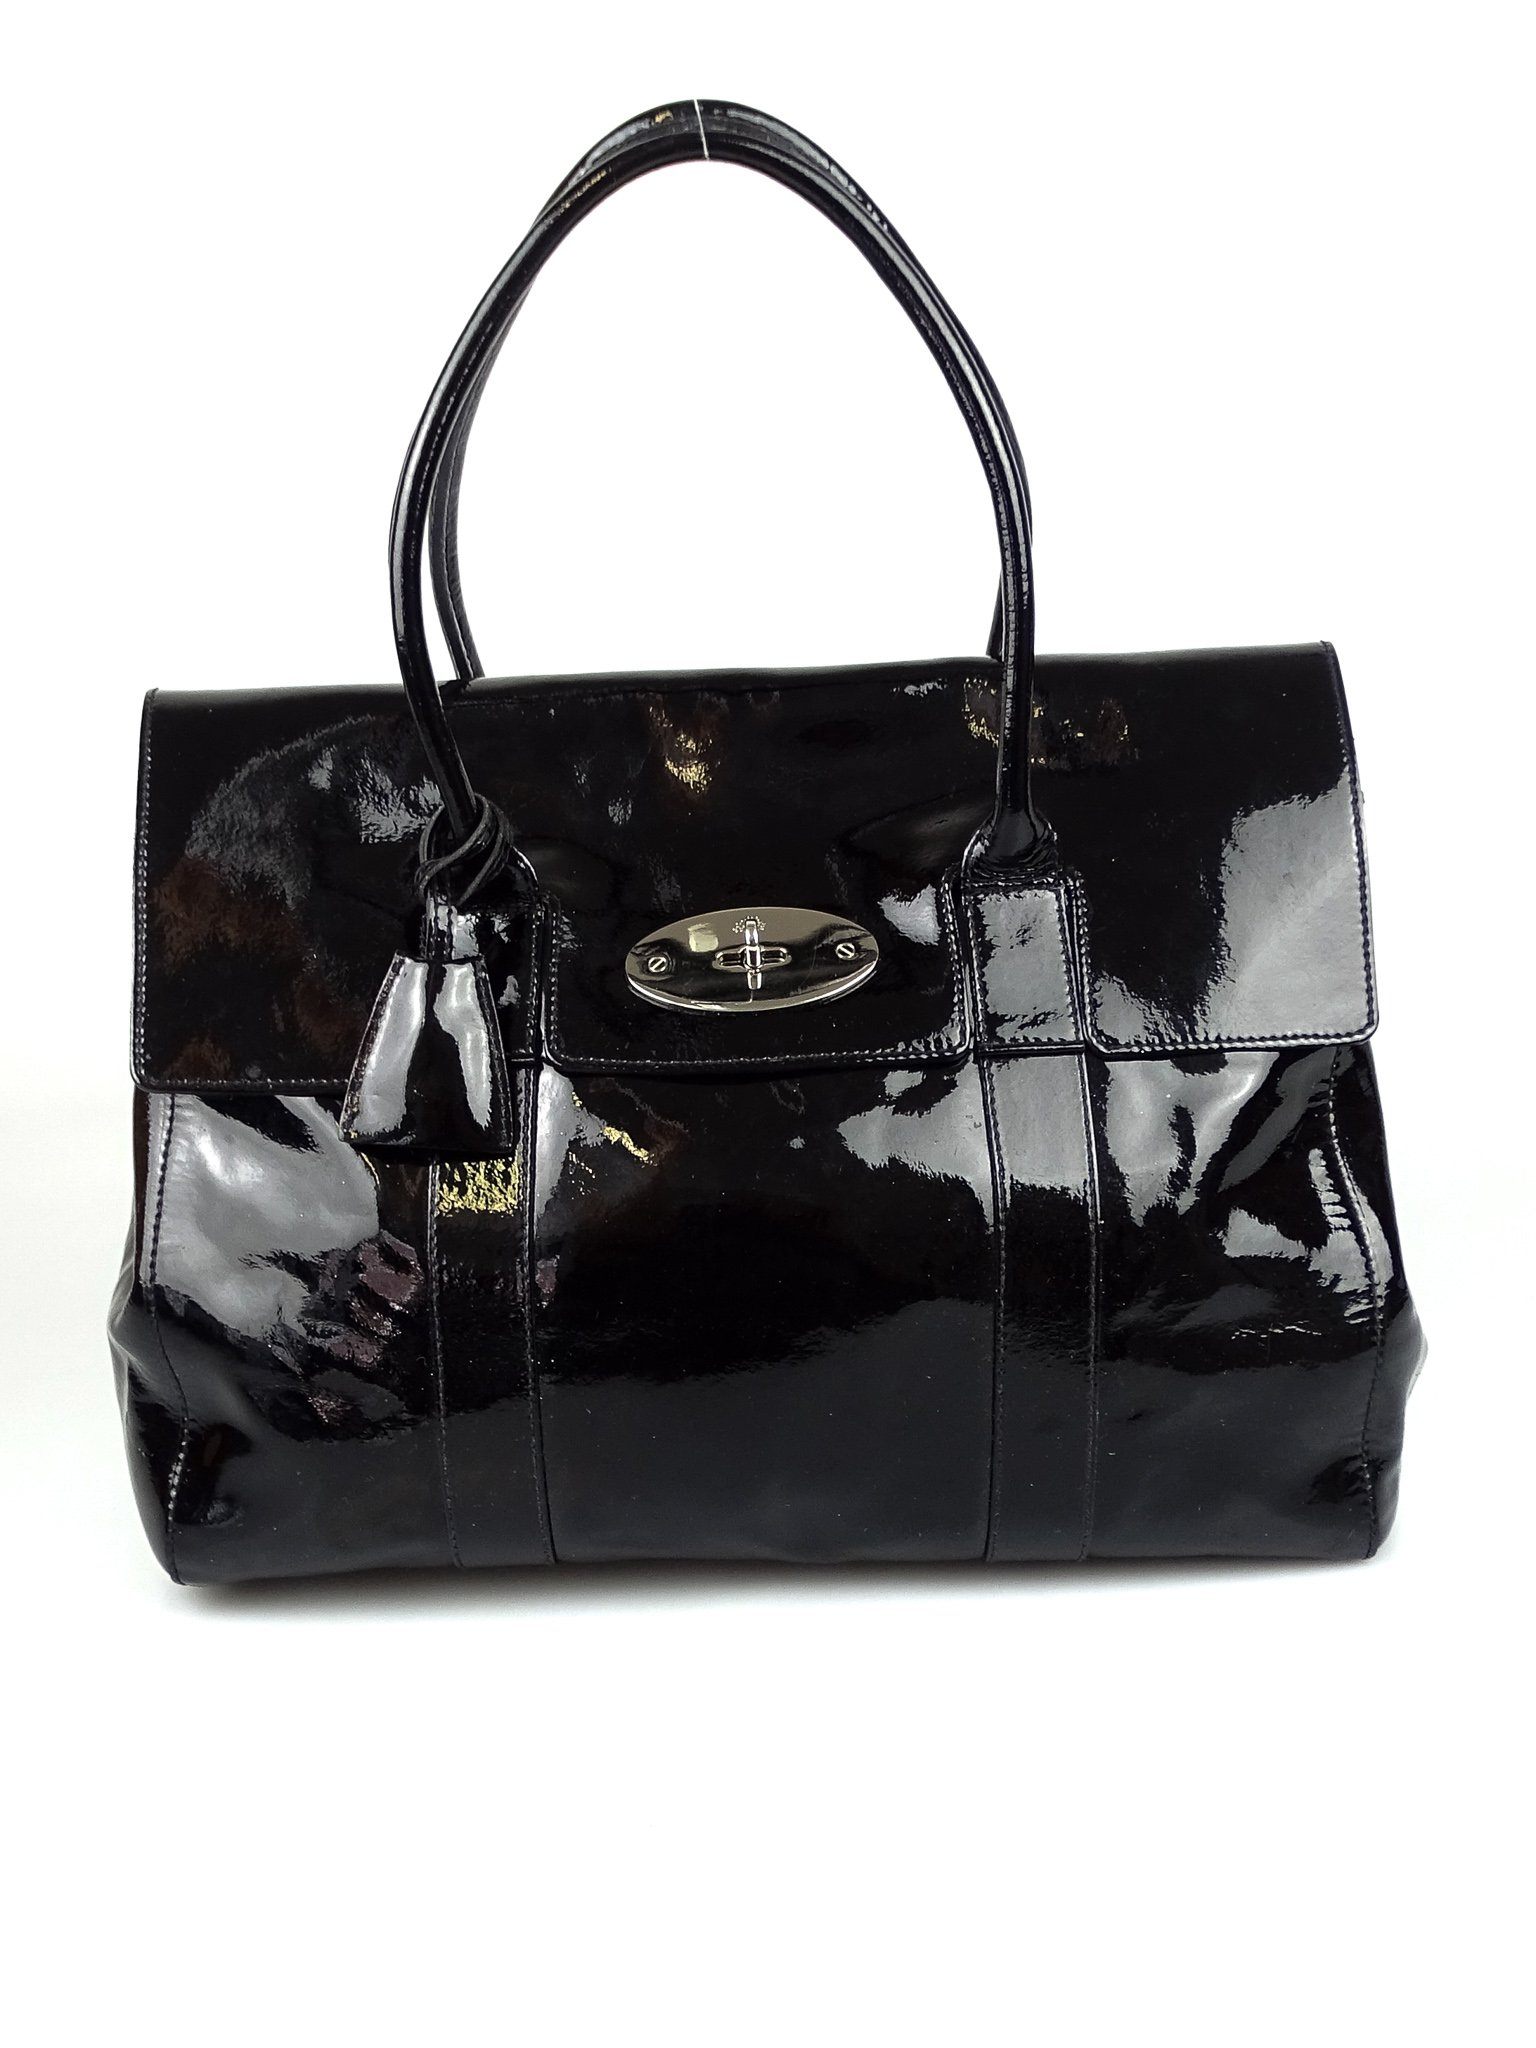 Mulberry Classic Bayswater in Black Drummed Patent Leather with Silver Hardware Bags Mulberry 